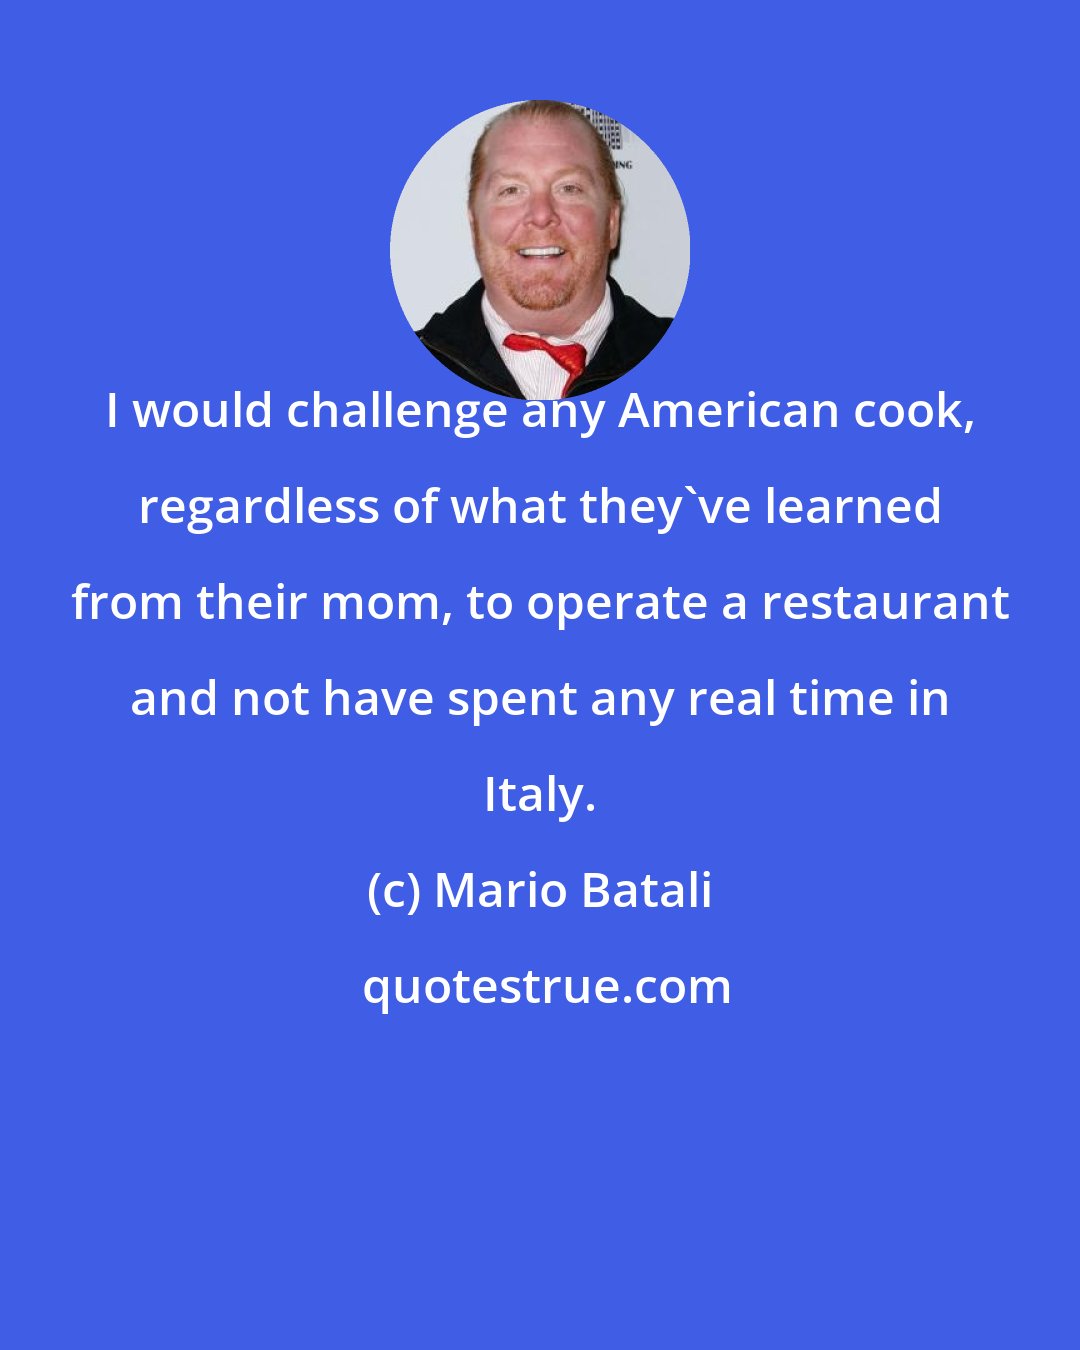 Mario Batali: I would challenge any American cook, regardless of what they've learned from their mom, to operate a restaurant and not have spent any real time in Italy.